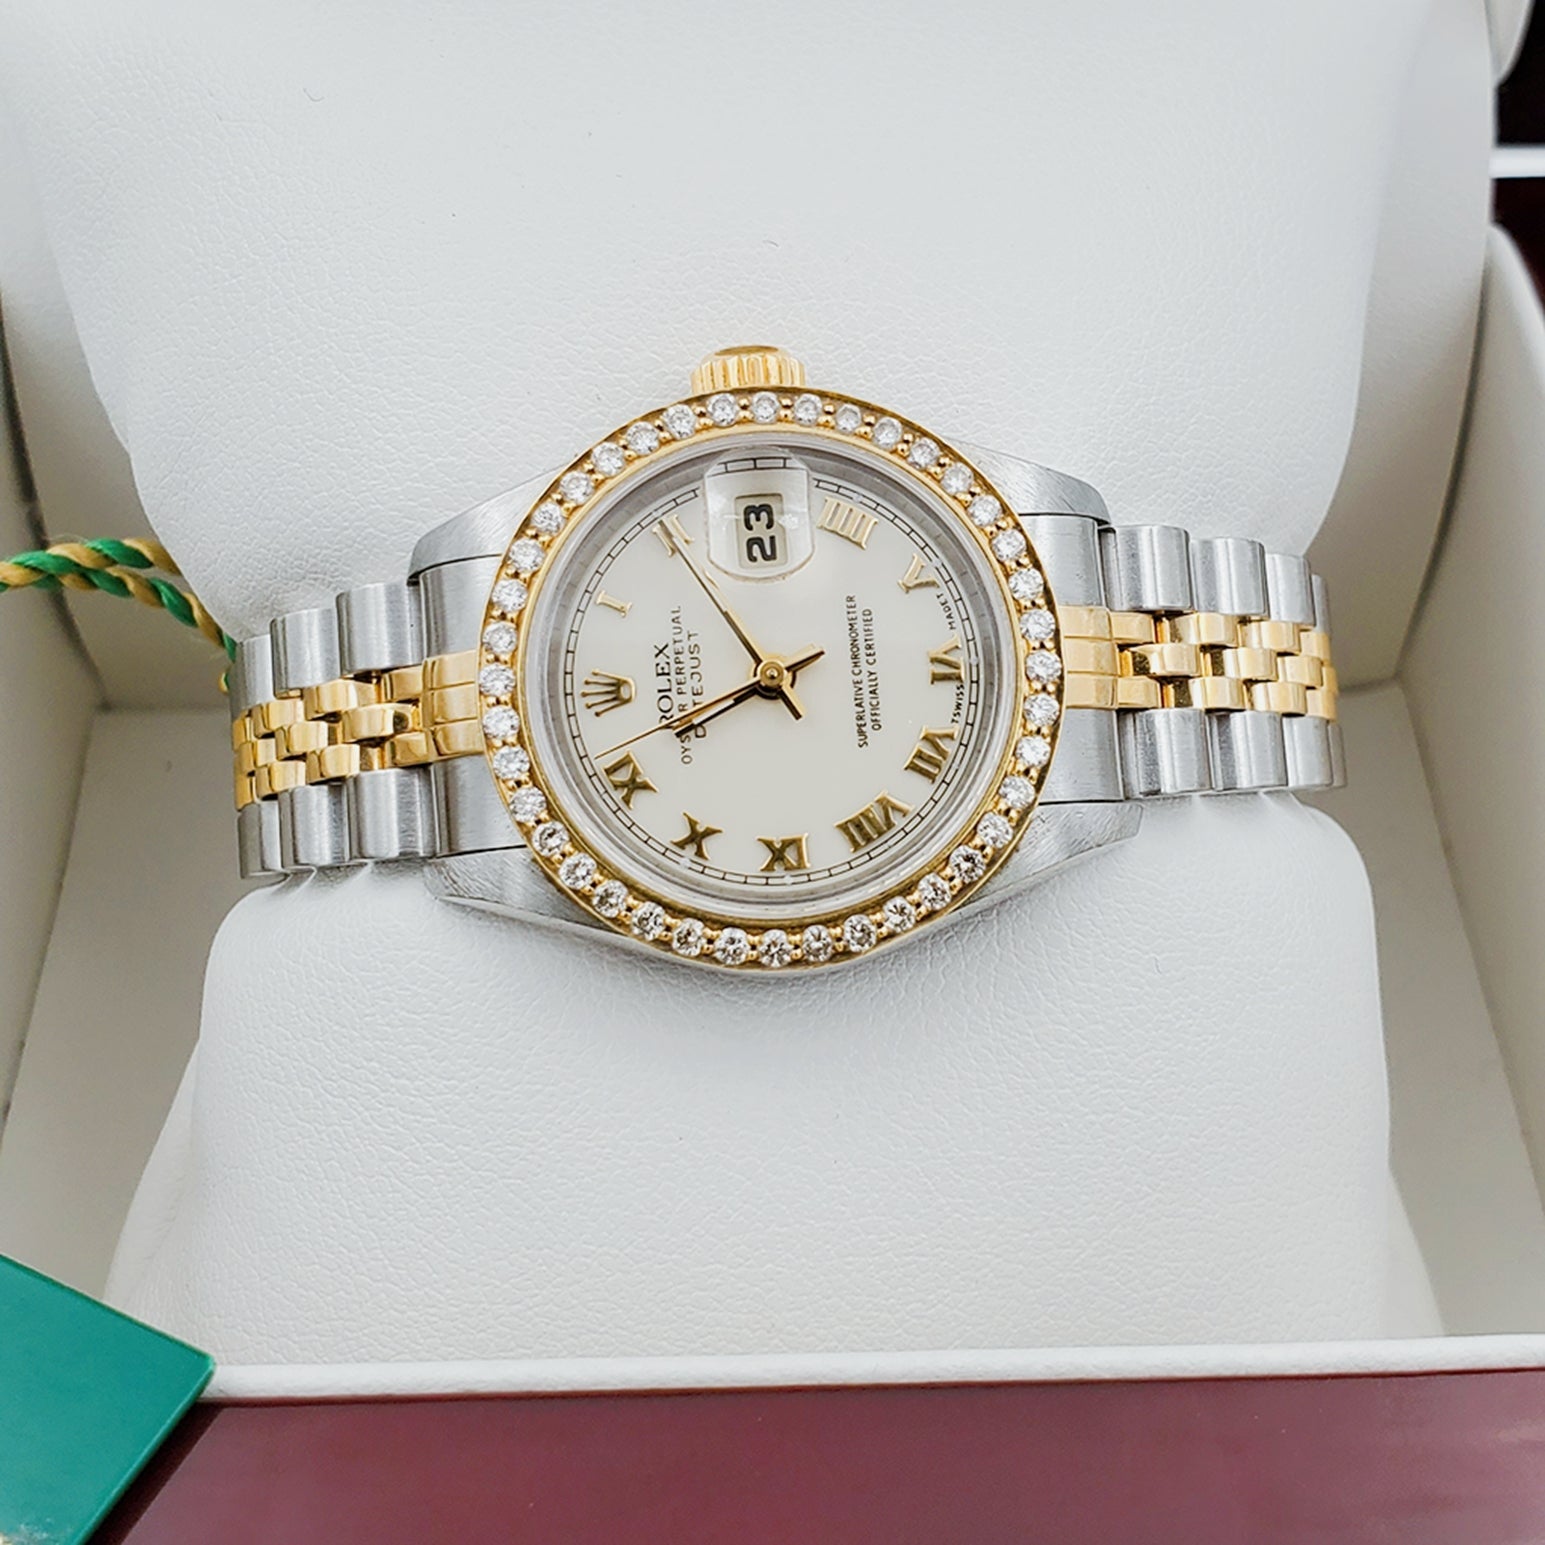 Ladies Rolex 18K Gold Two Tone 26mm DateJust Wristwatch w/ Off-White Dial, Roman Numerals & Diamond Bezel. (Pre-Owned)